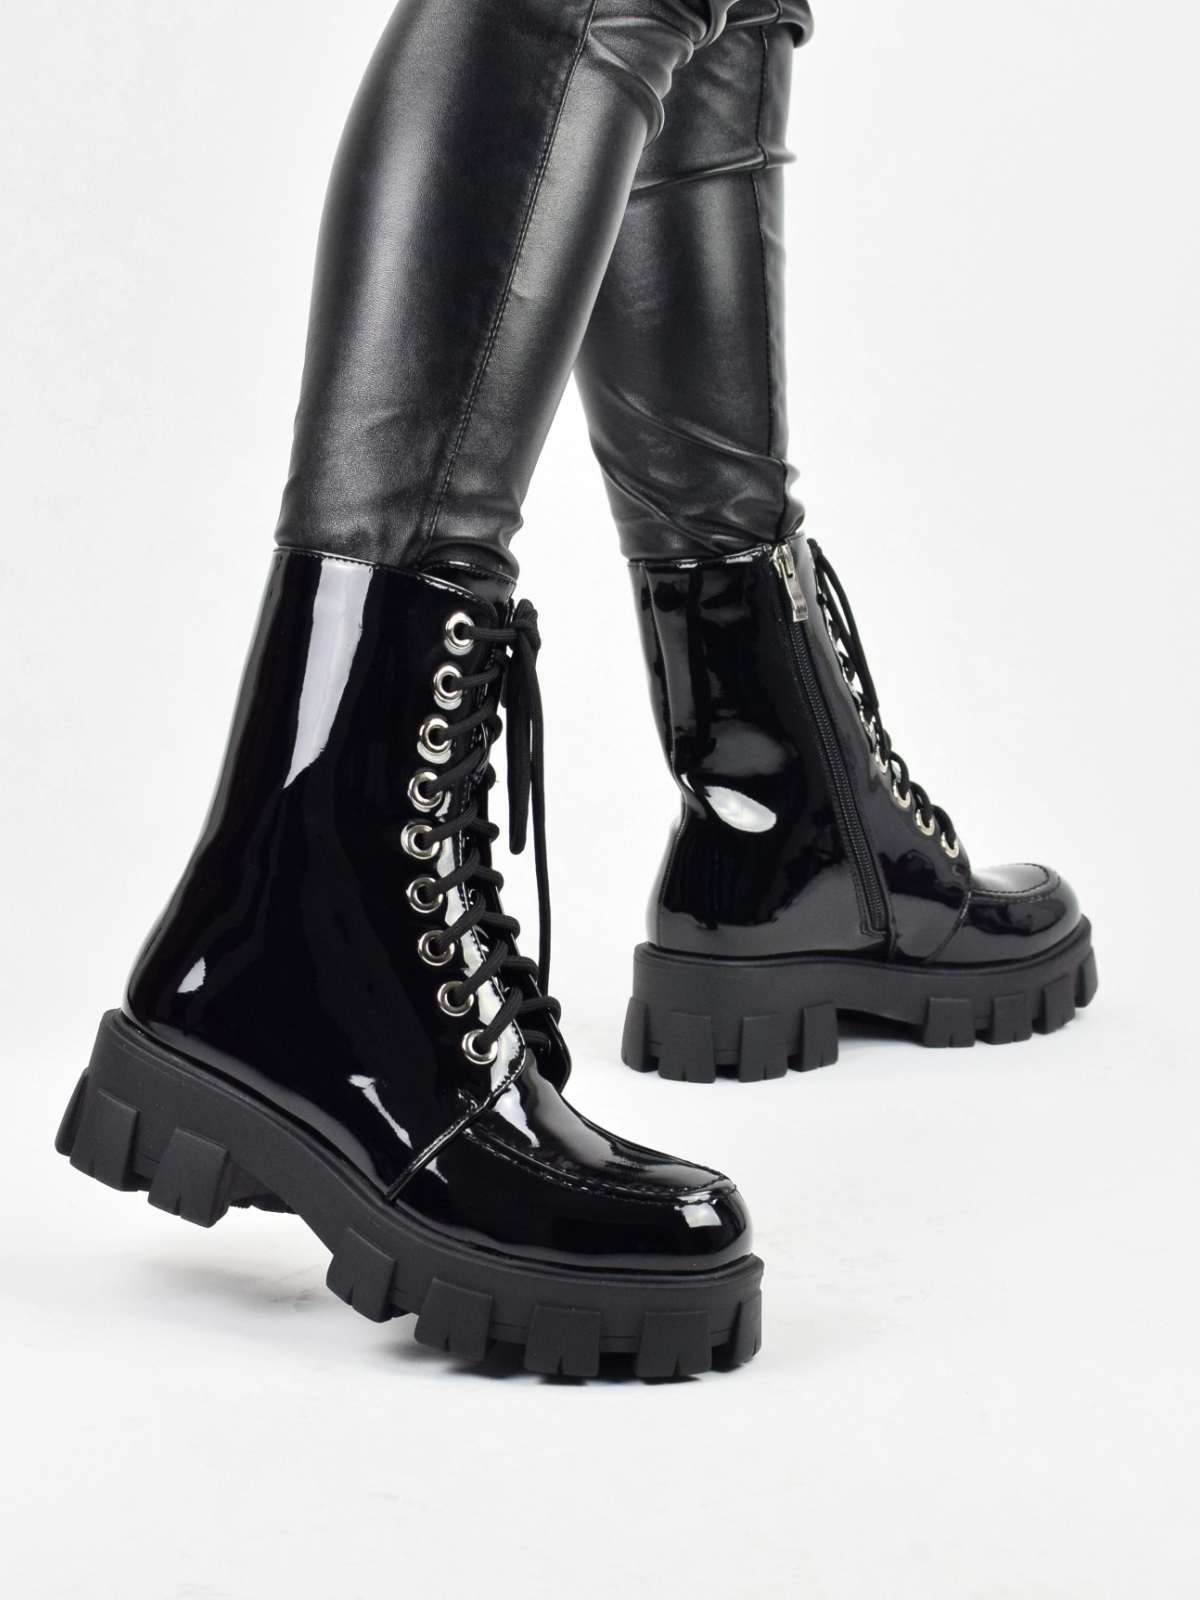 Exclusive design ankle boots in luxurious black